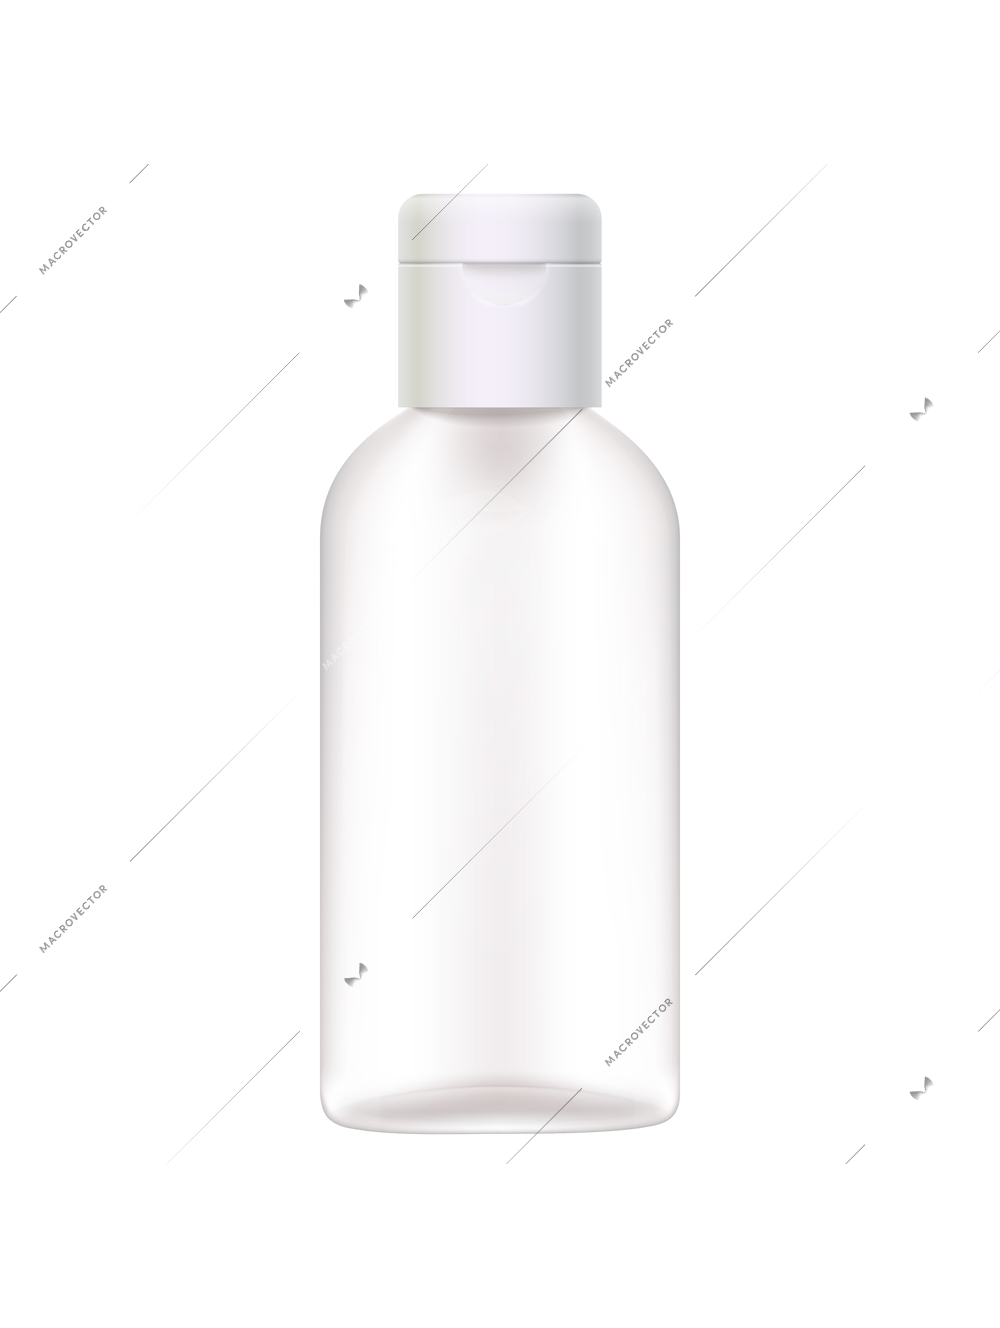 Sanitizer bottles realistic composition with empty sanitizer bottle with closed cap vector illustration